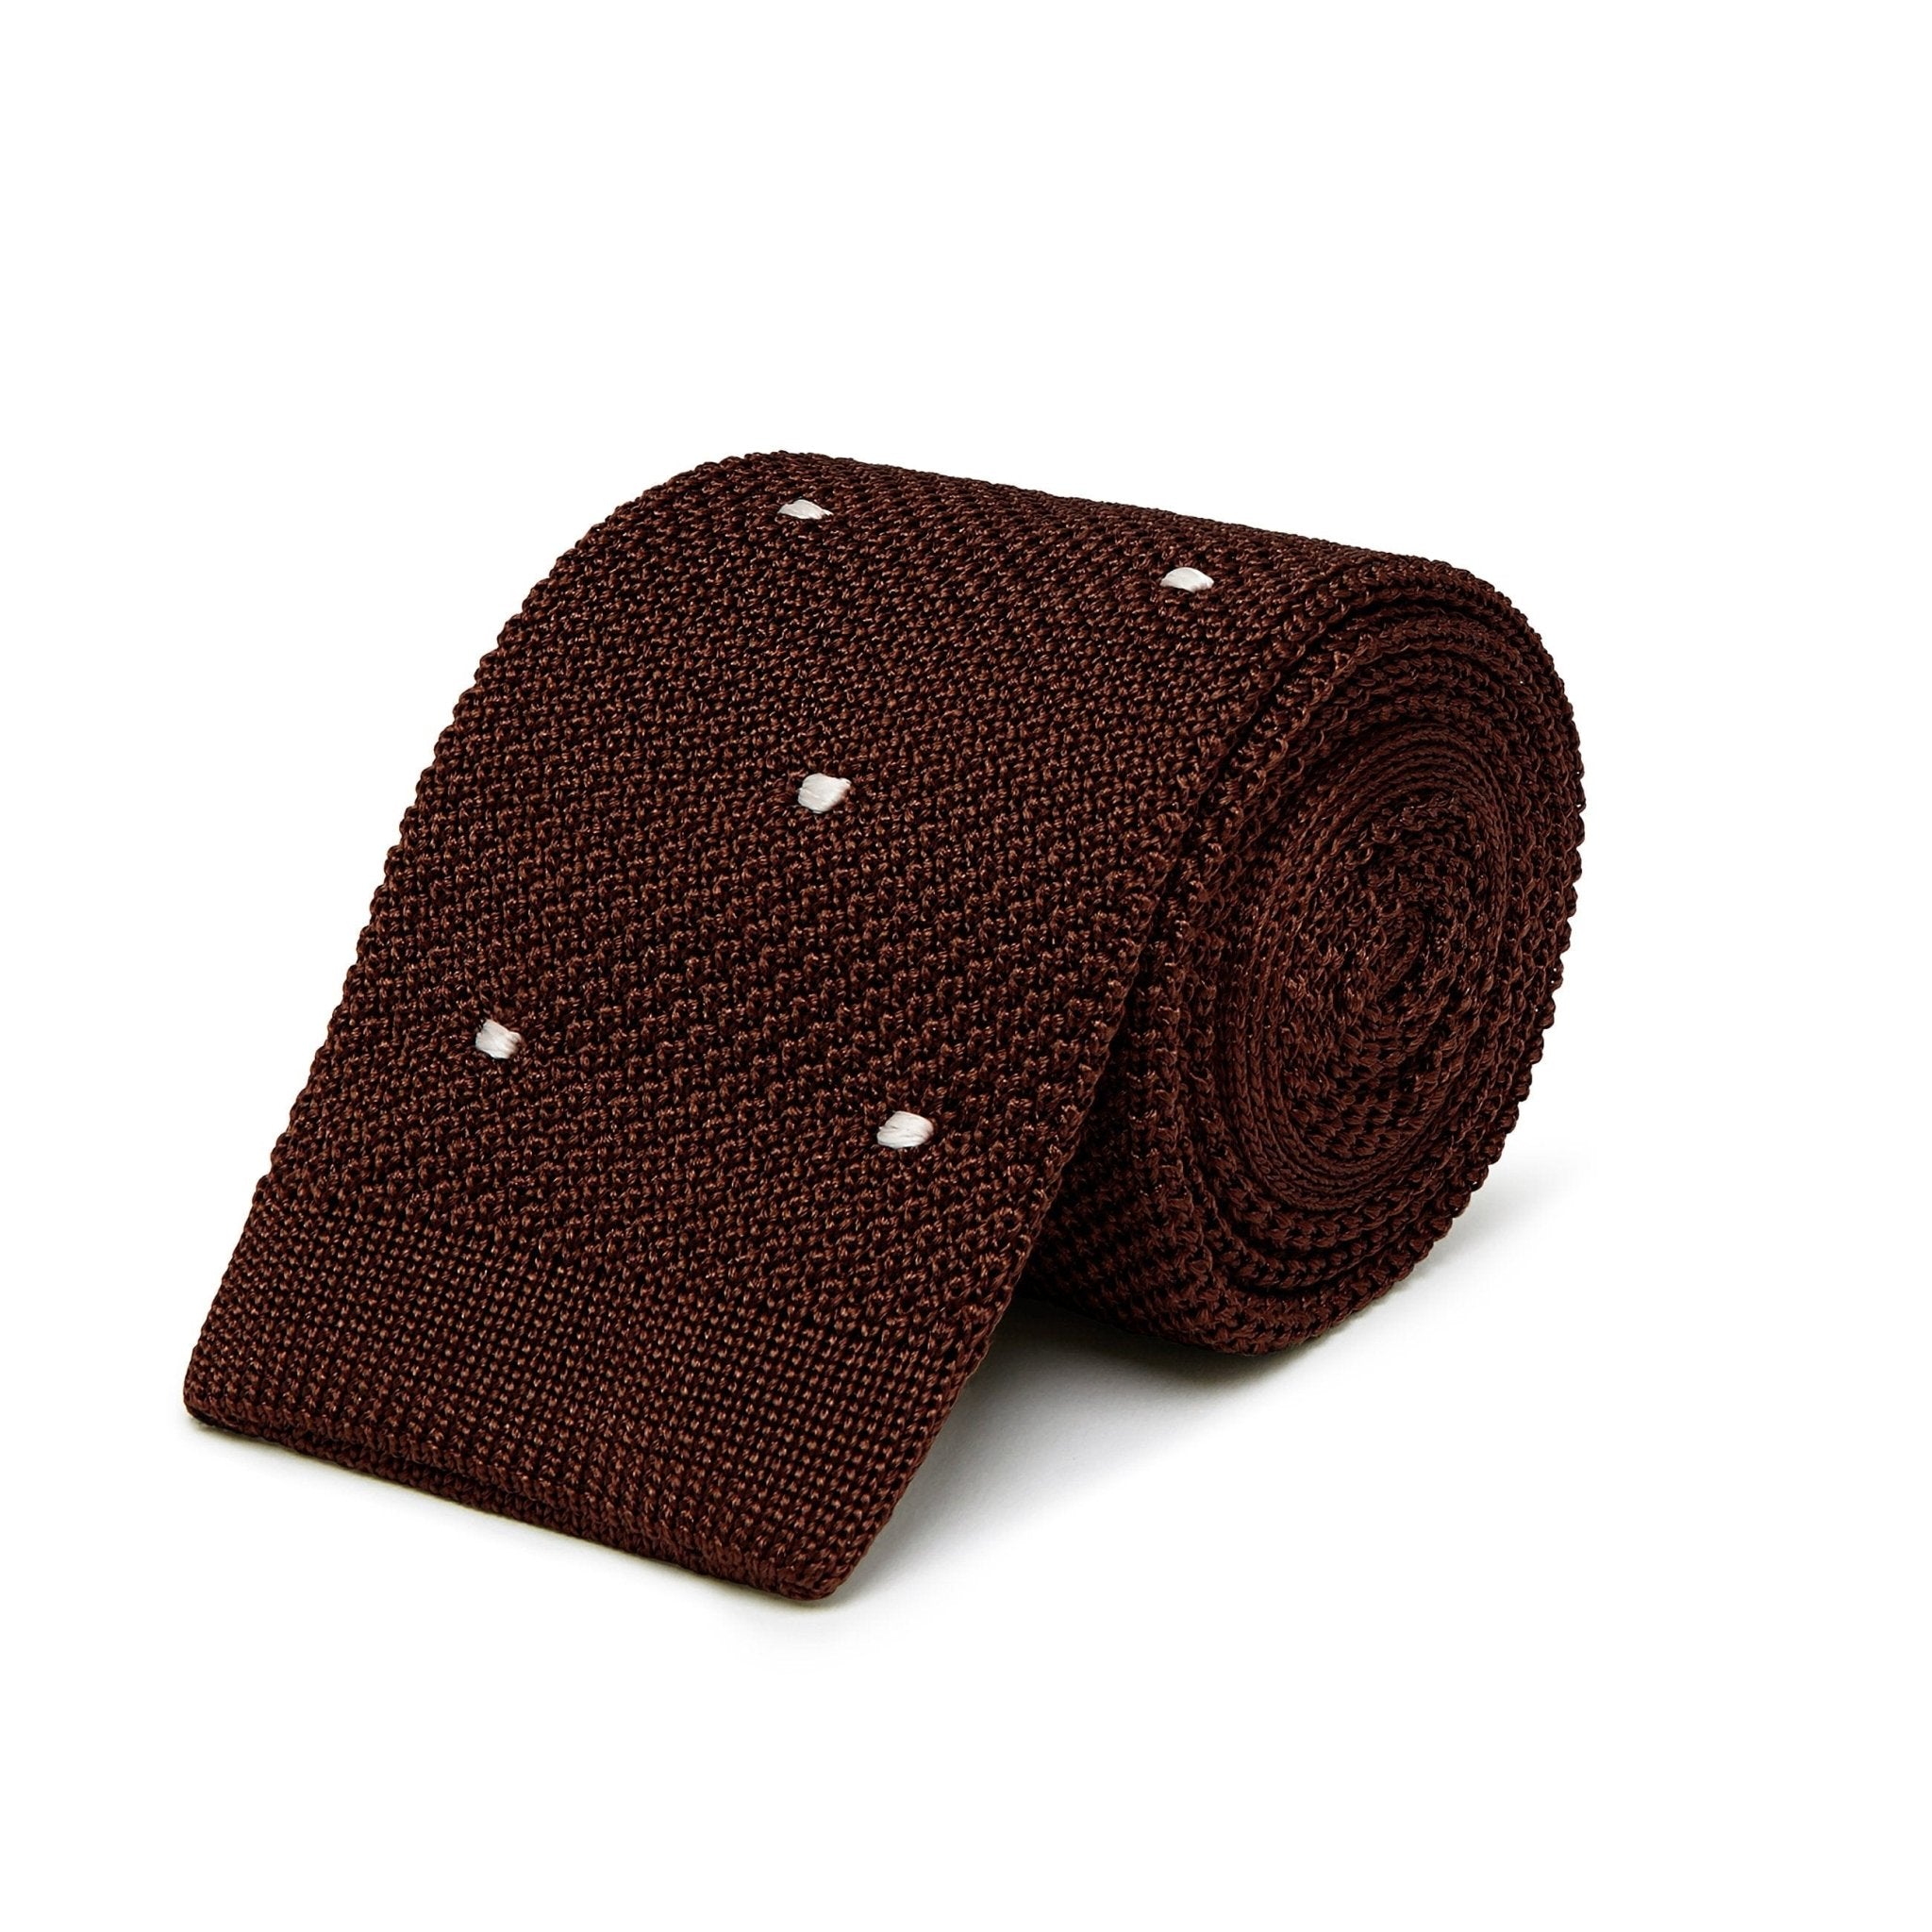 Brown Knitted Silk Tie with White Spots